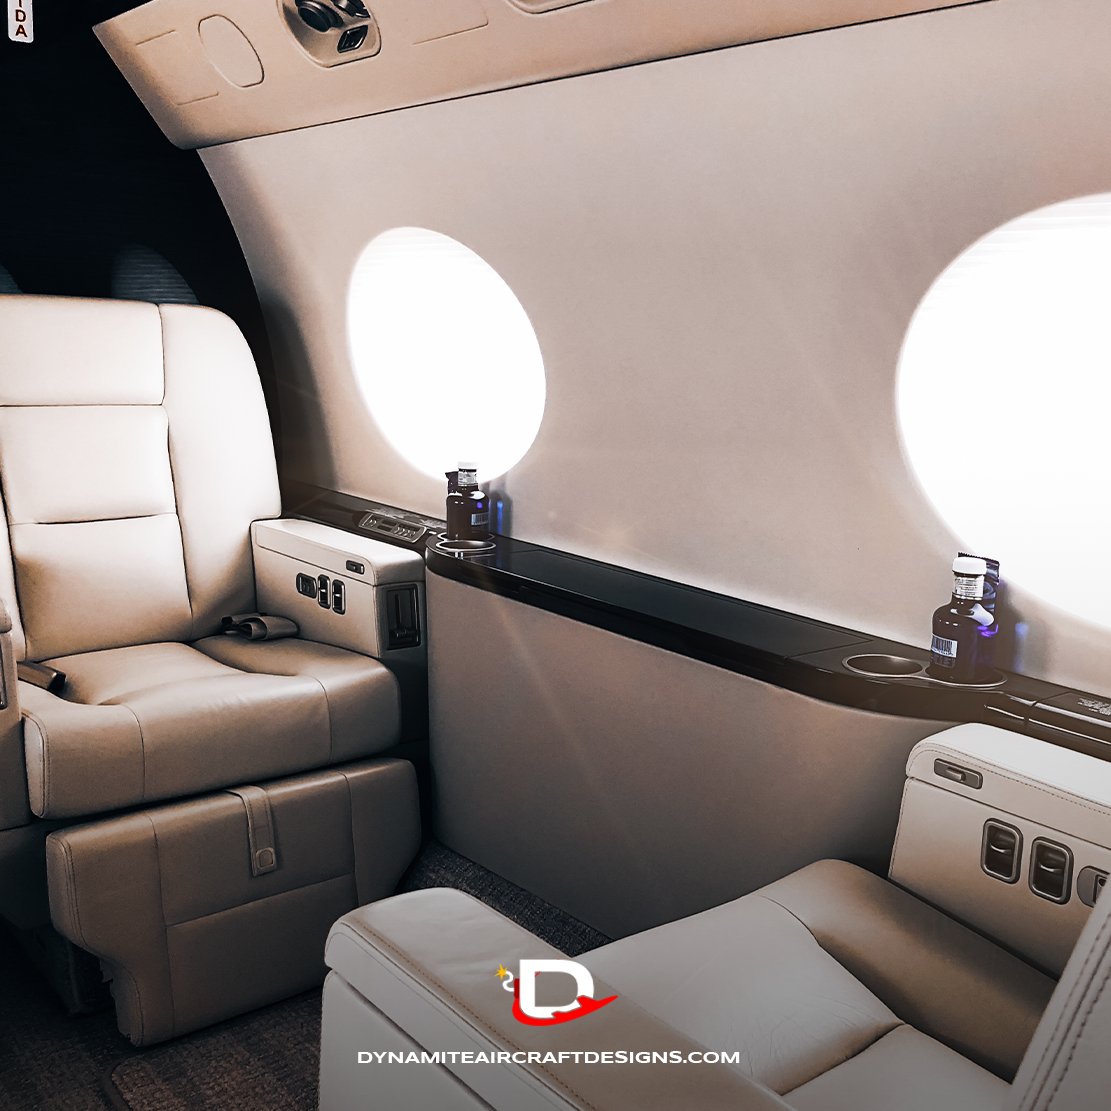 From takeoff to landing, our aviation interiors are designed with your comfort in mind 💺✈️ #aviationinteriors #comfortabletravel #privatejetcharter #luxurylifestyle #aviationlovers